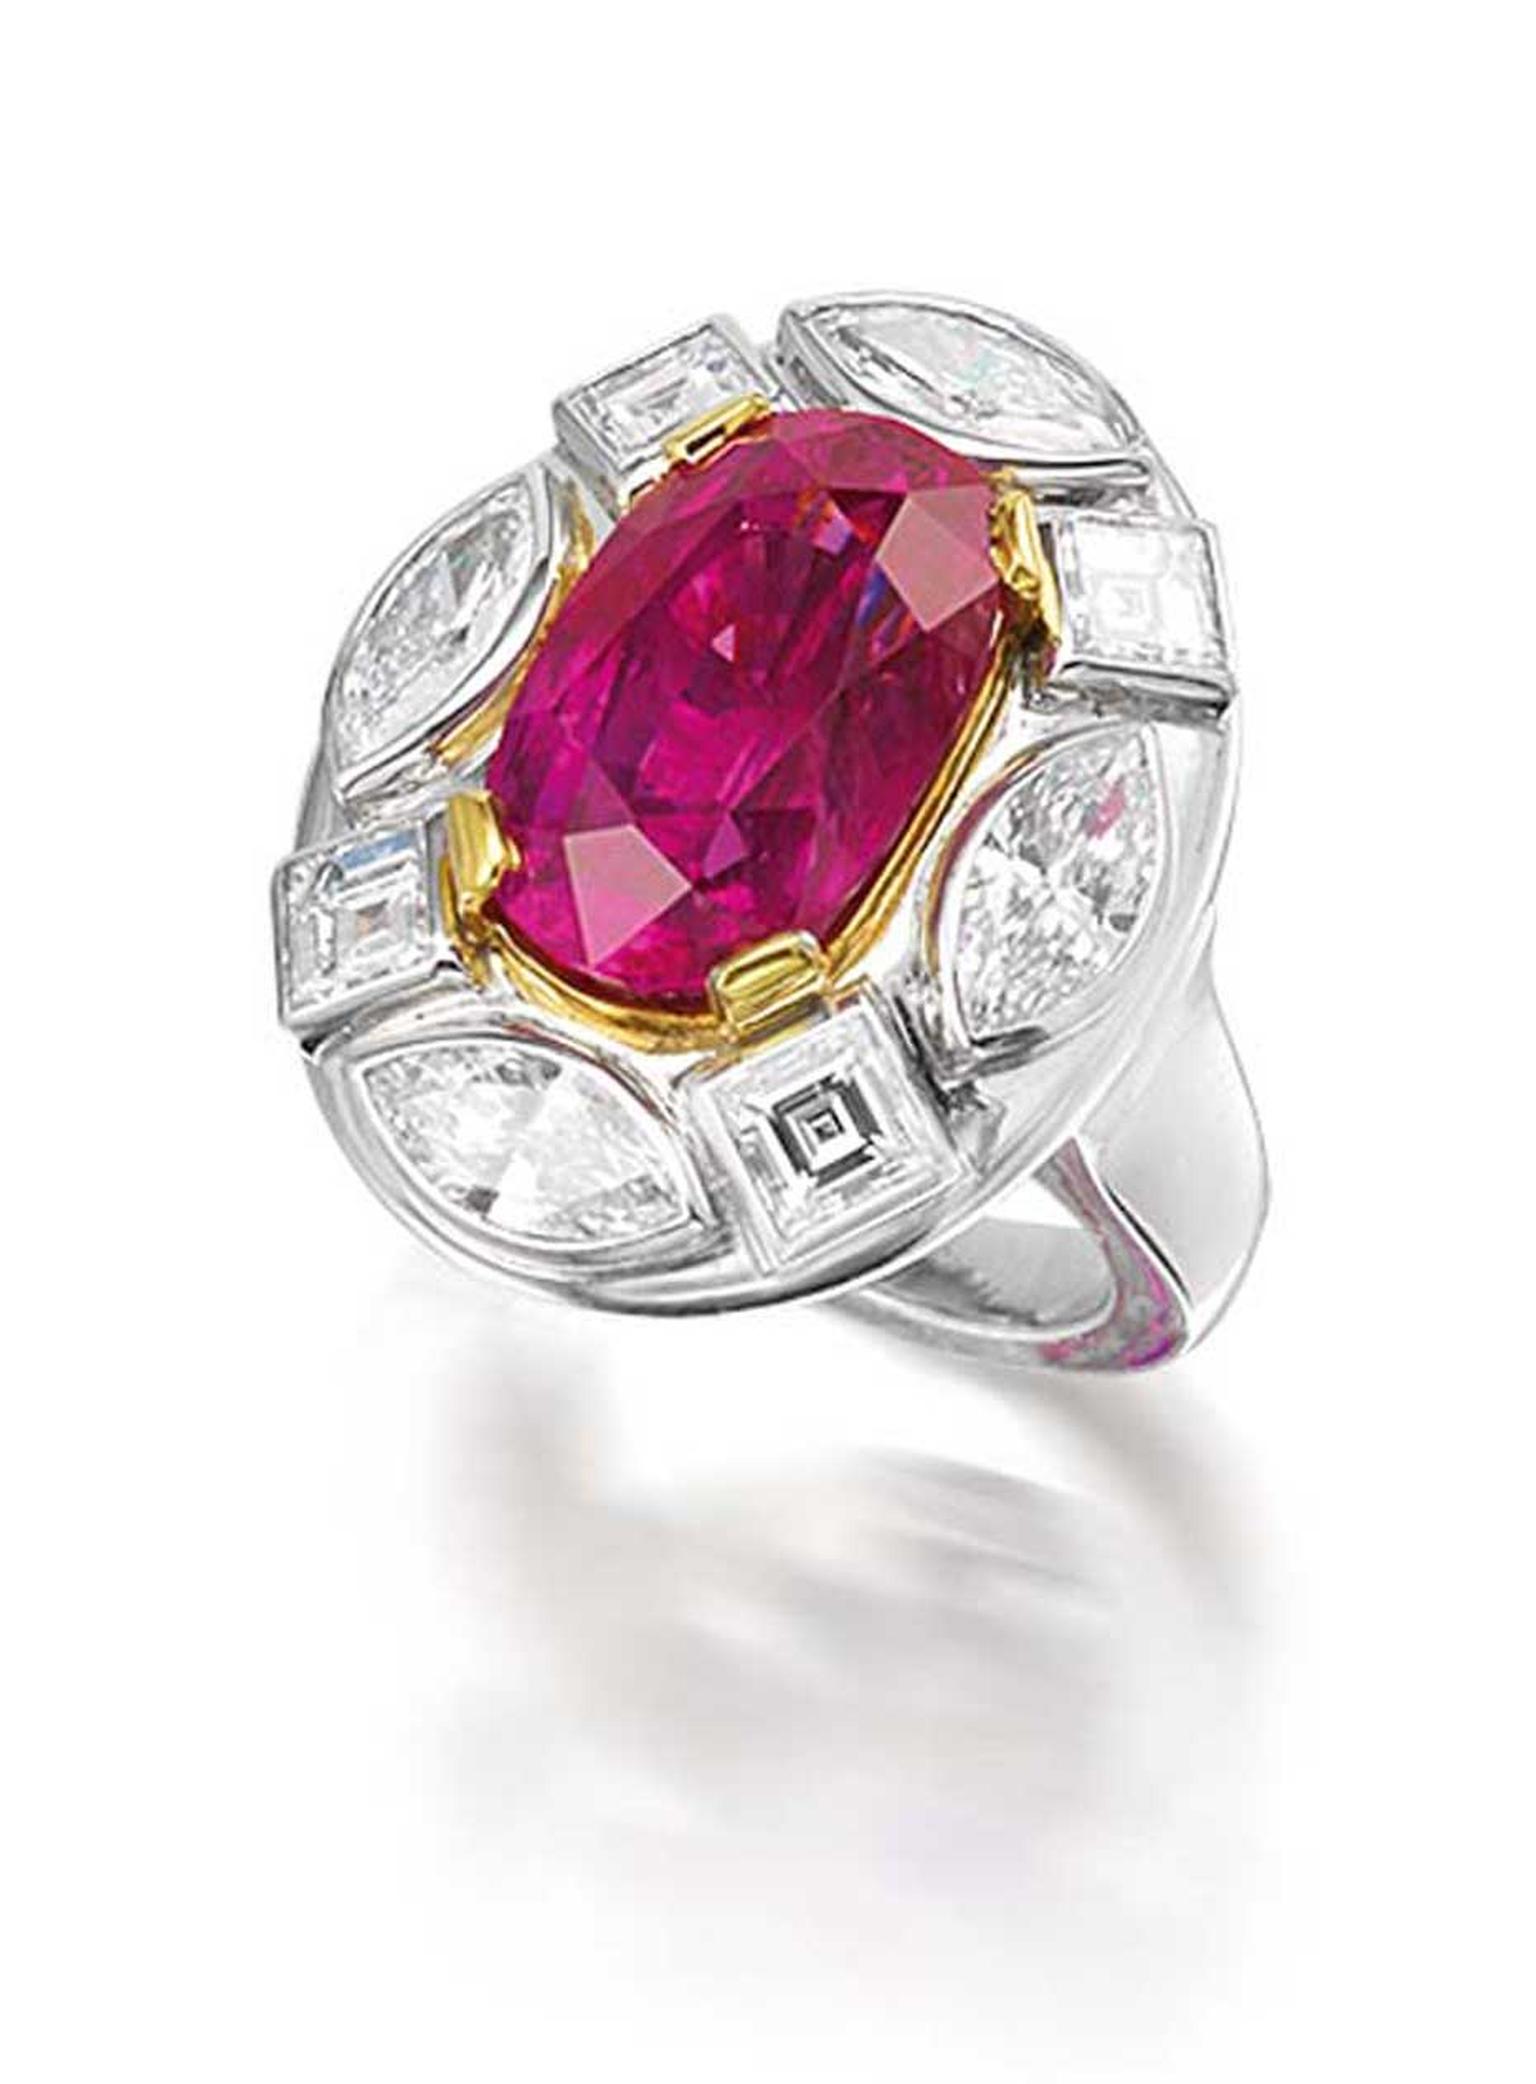 Ruby and diamond Georgina ring by Marina B with a 10.54ct Burmese ruby surrounded by marquise and Asscher-cut diamonds.